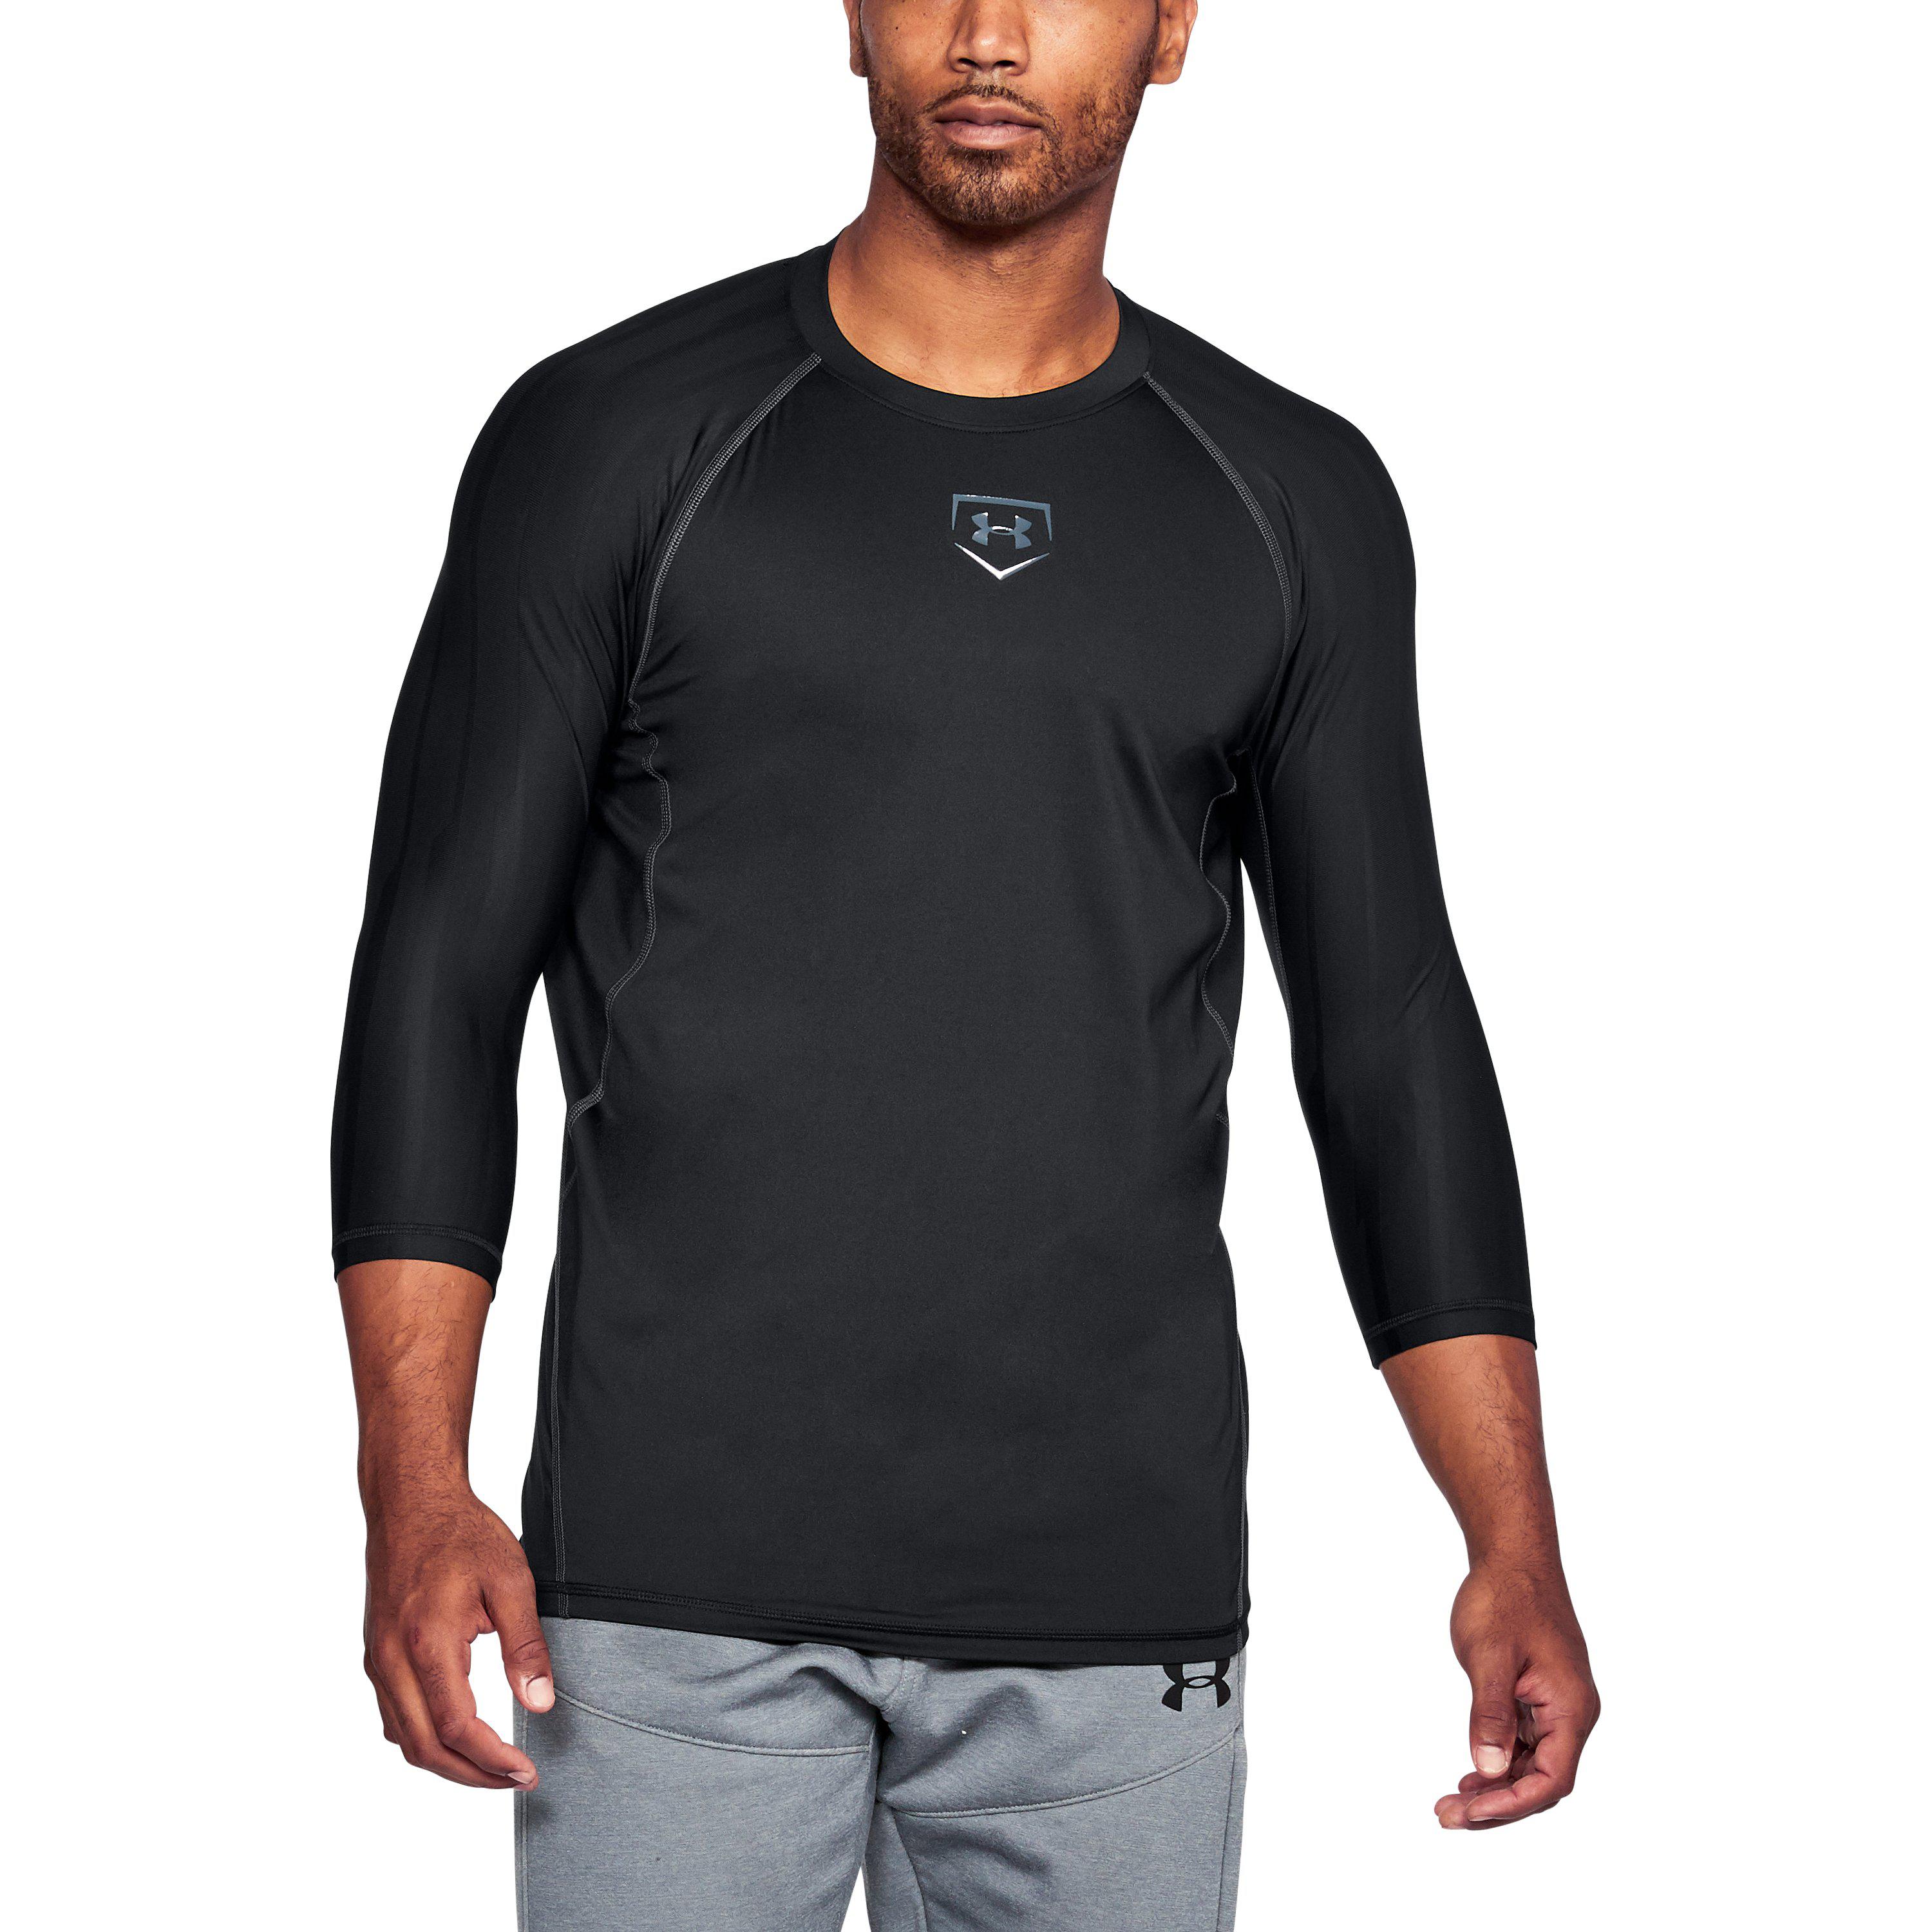 UNDER ARMOUR MENS HEAT GEAR LONG SLEEVE BLACK FITTED SHIRT SIZE